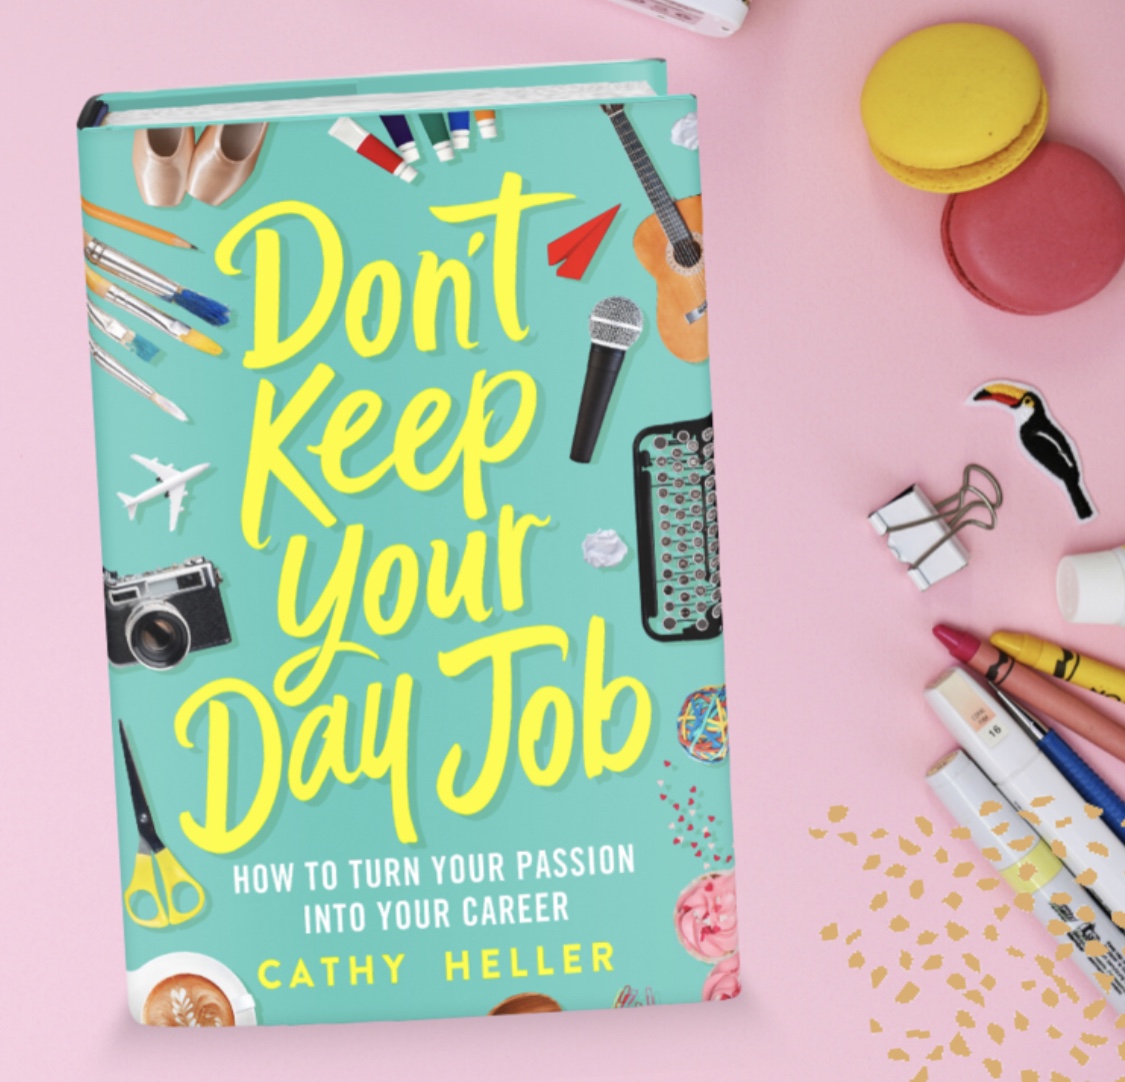 Book Review: Don’t Keep Your Day Job by Cathy Heller